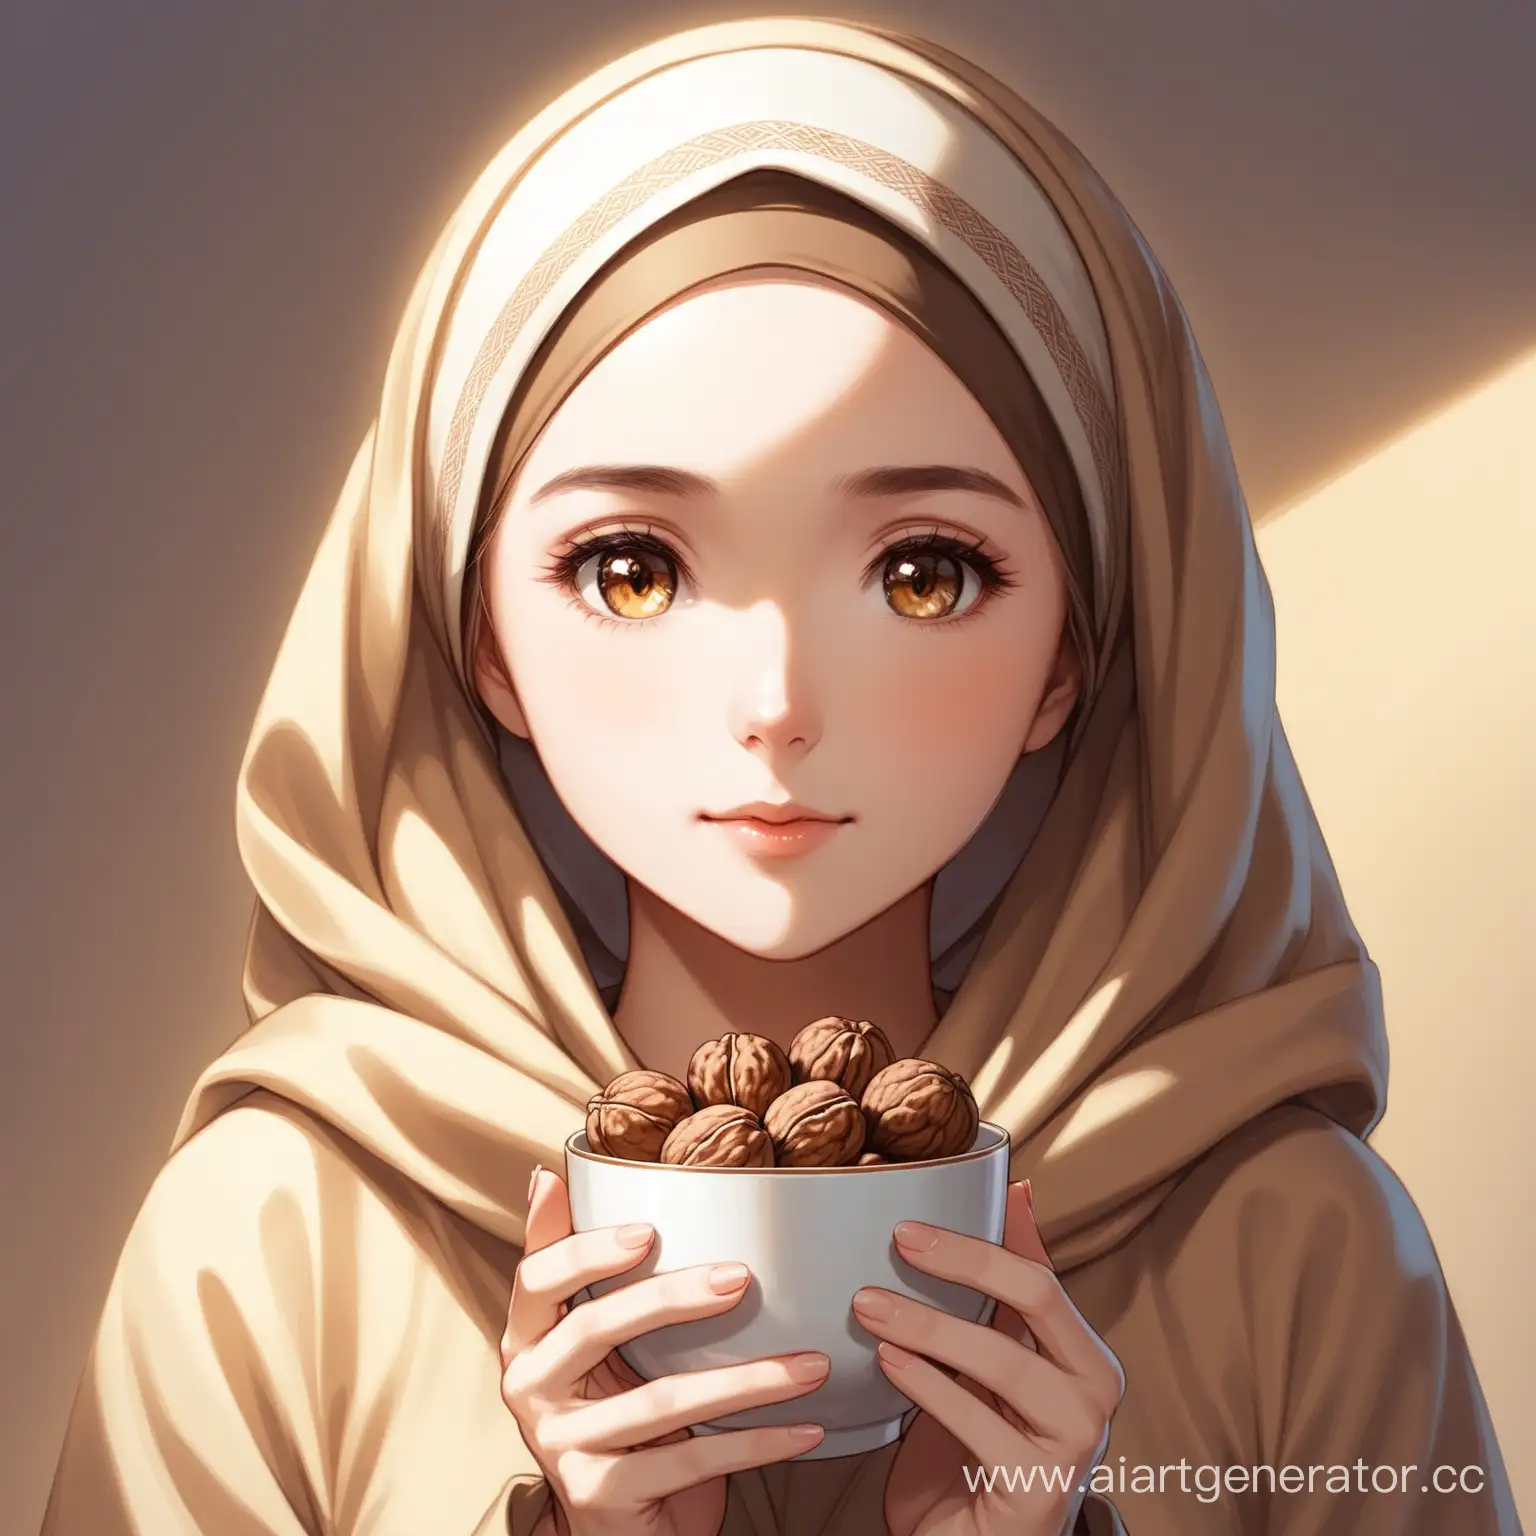 Young-Woman-in-Headscarf-Holding-Cup-of-Walnuts